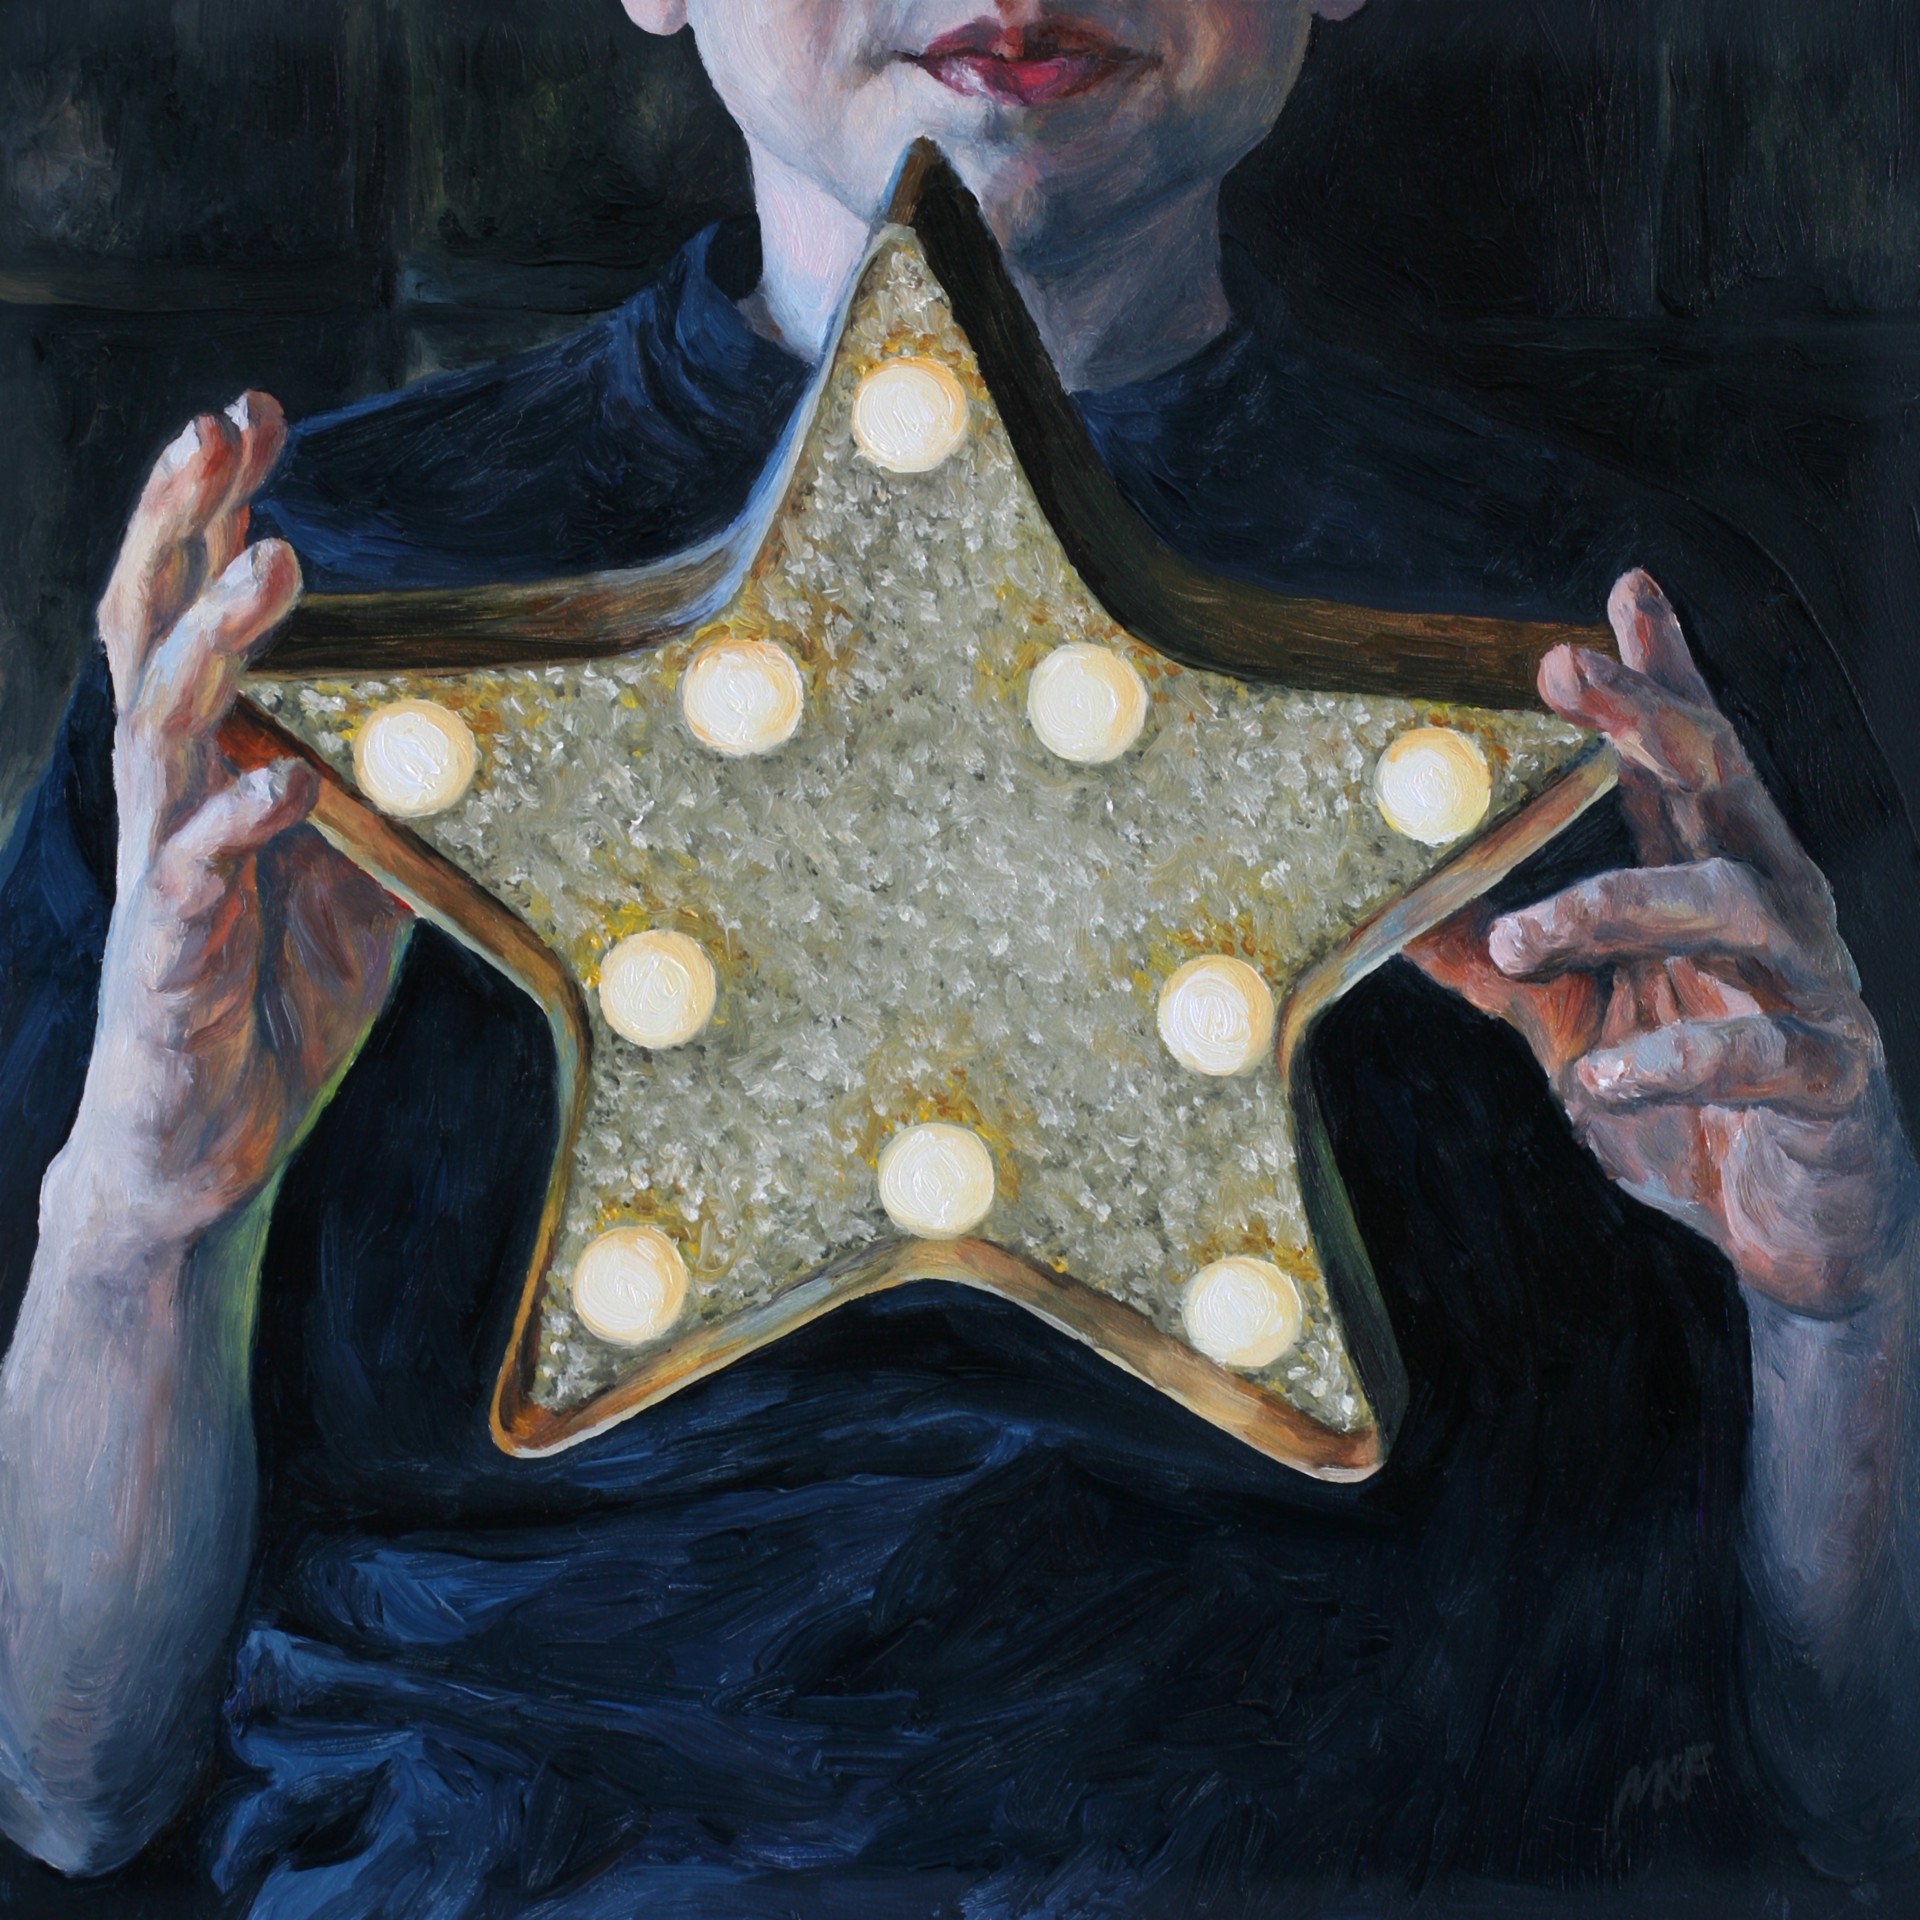 The Star in my hands by Marianna Foster